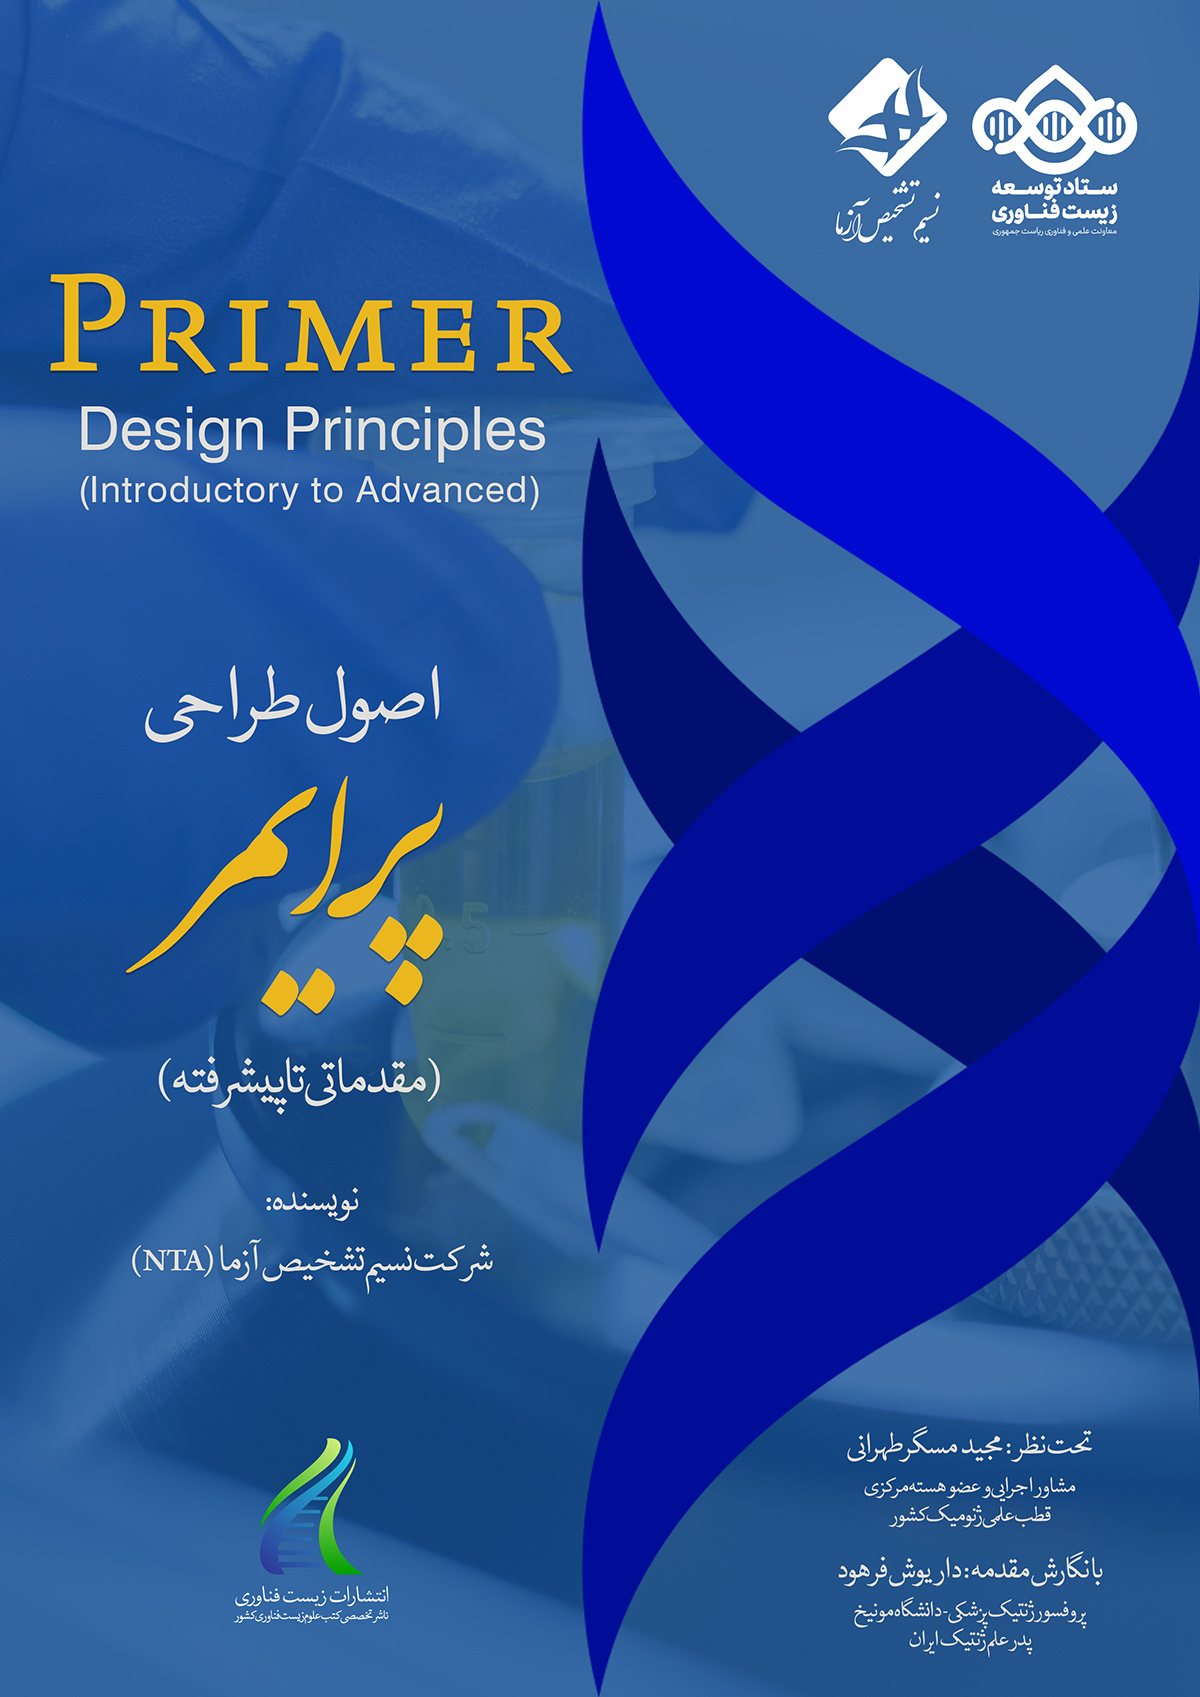 Primer Design Principles (Introductory to Advanced)